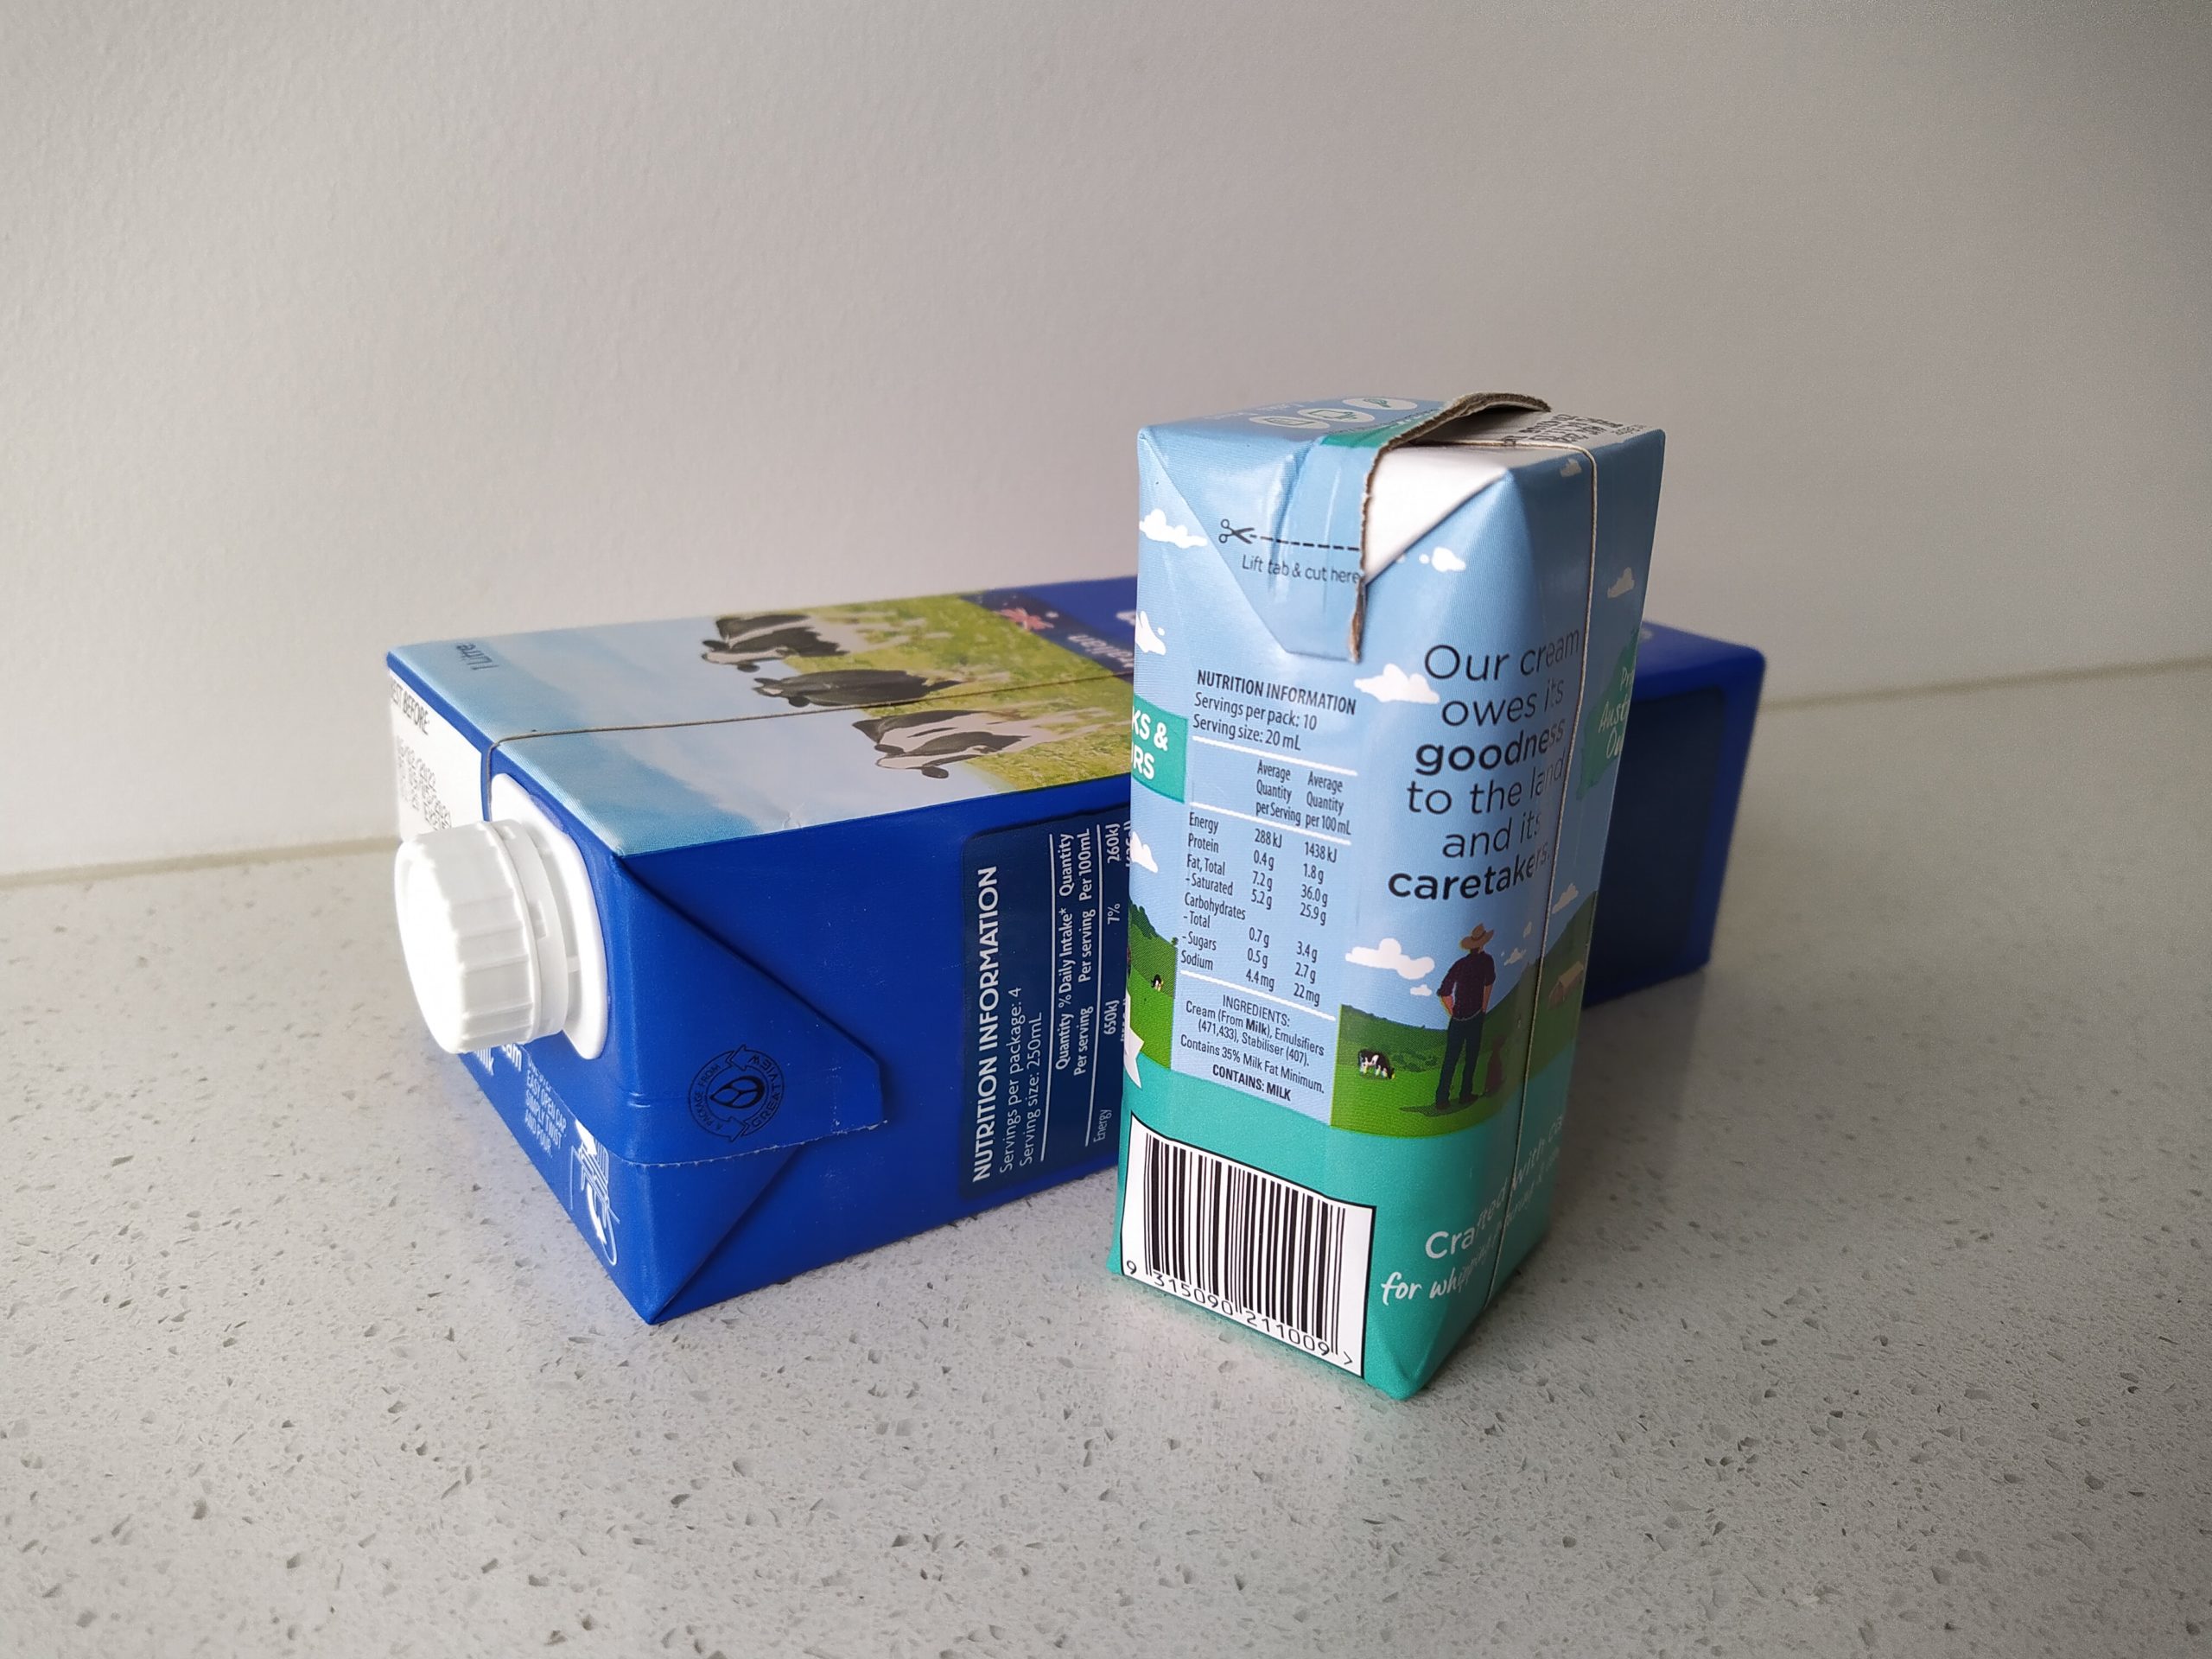 Which bin for long-life cartons?